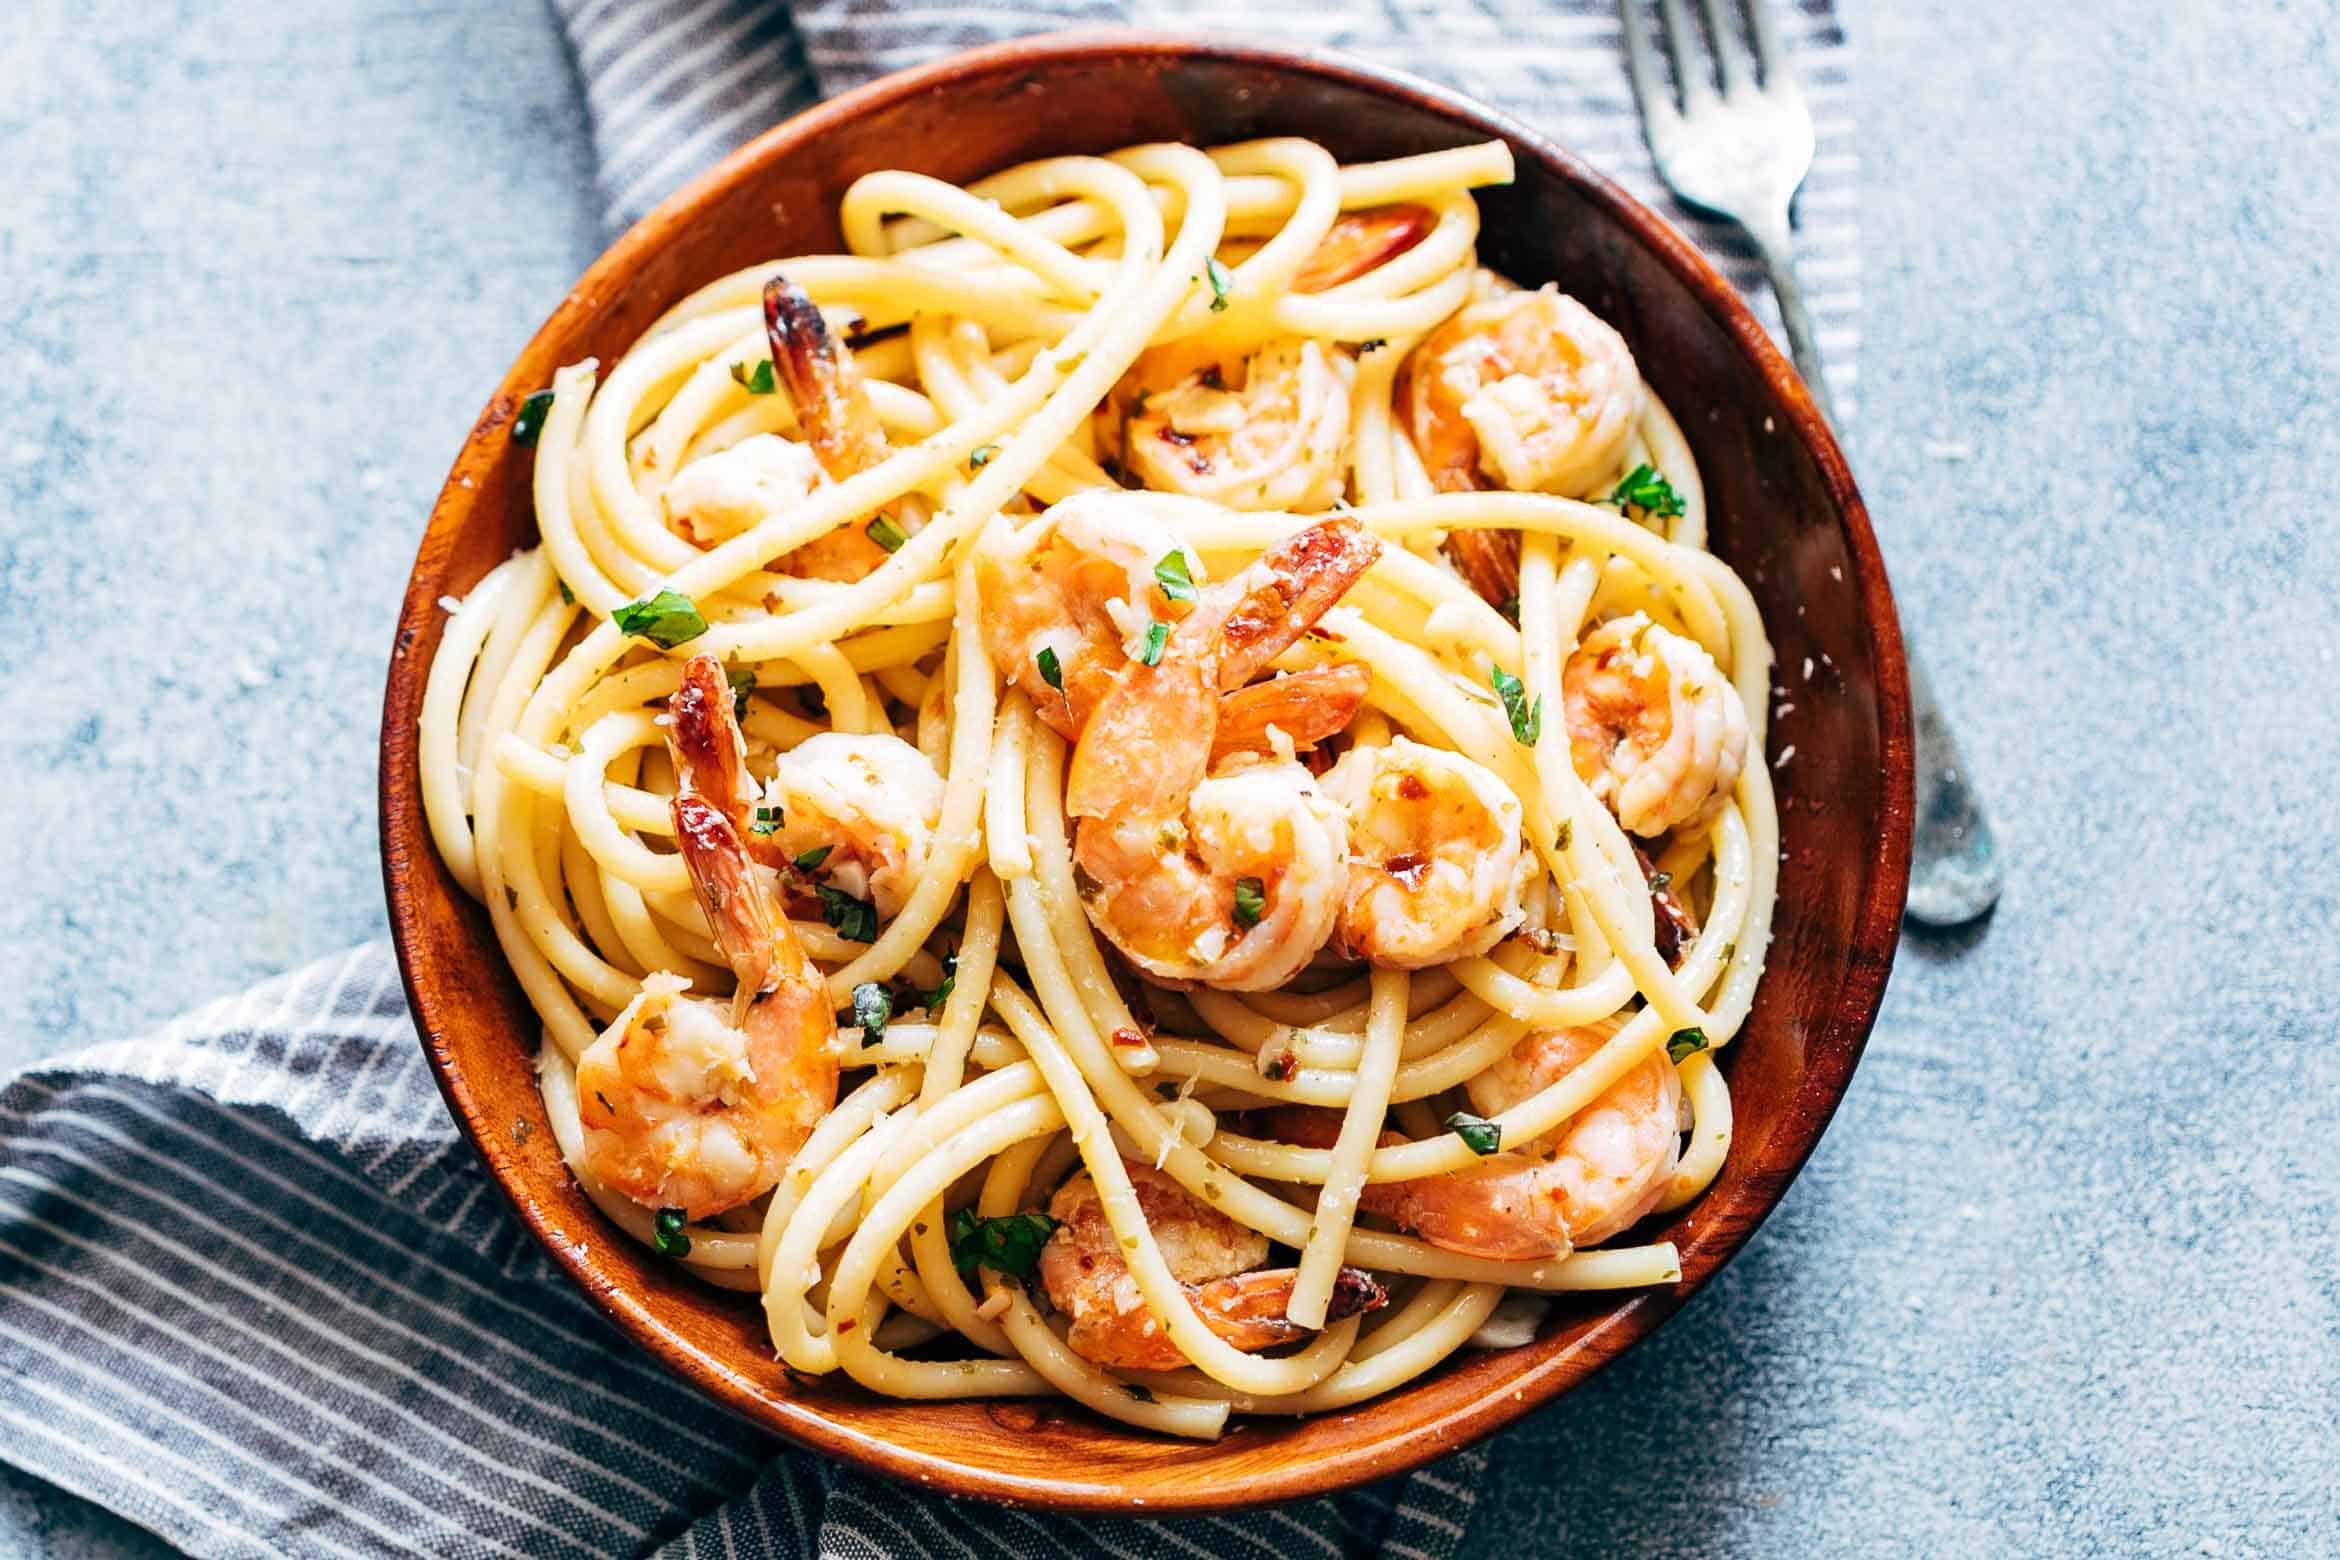 Shrimp Spaghetti Aglio Olio is a 5 ingredient pasta recipe (shrimp, olive oil, garlic, peperoncino or chilli flakes and parsley) thats ready in 20 minutes and has the easiest, most delicious pasta sauce you'll ever make!